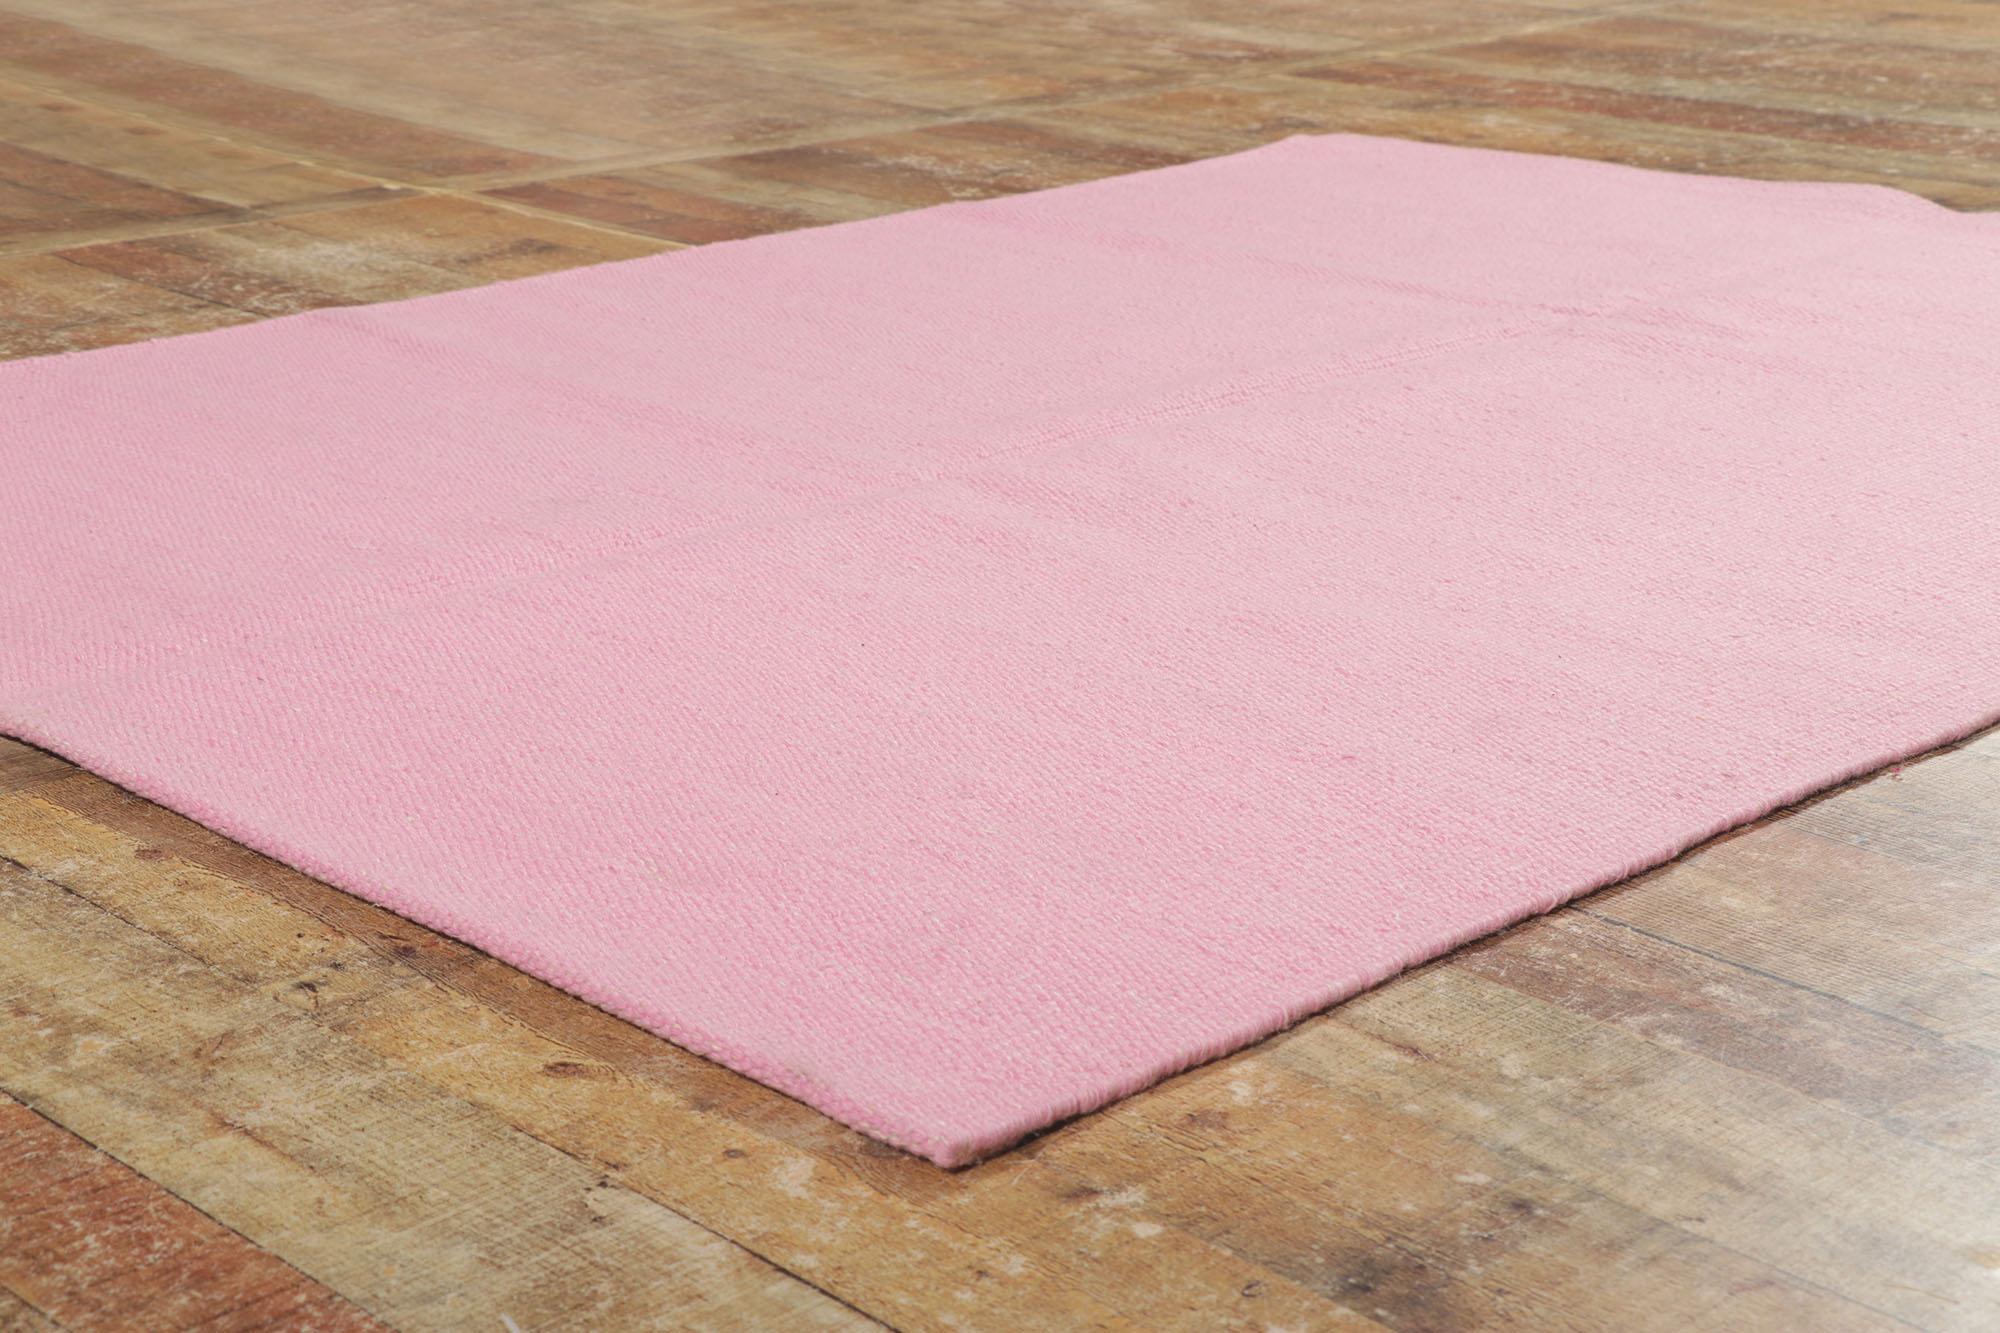 New Swedish Inspired Pink Kilim Rug with Scandinavian Modern Style For Sale 6